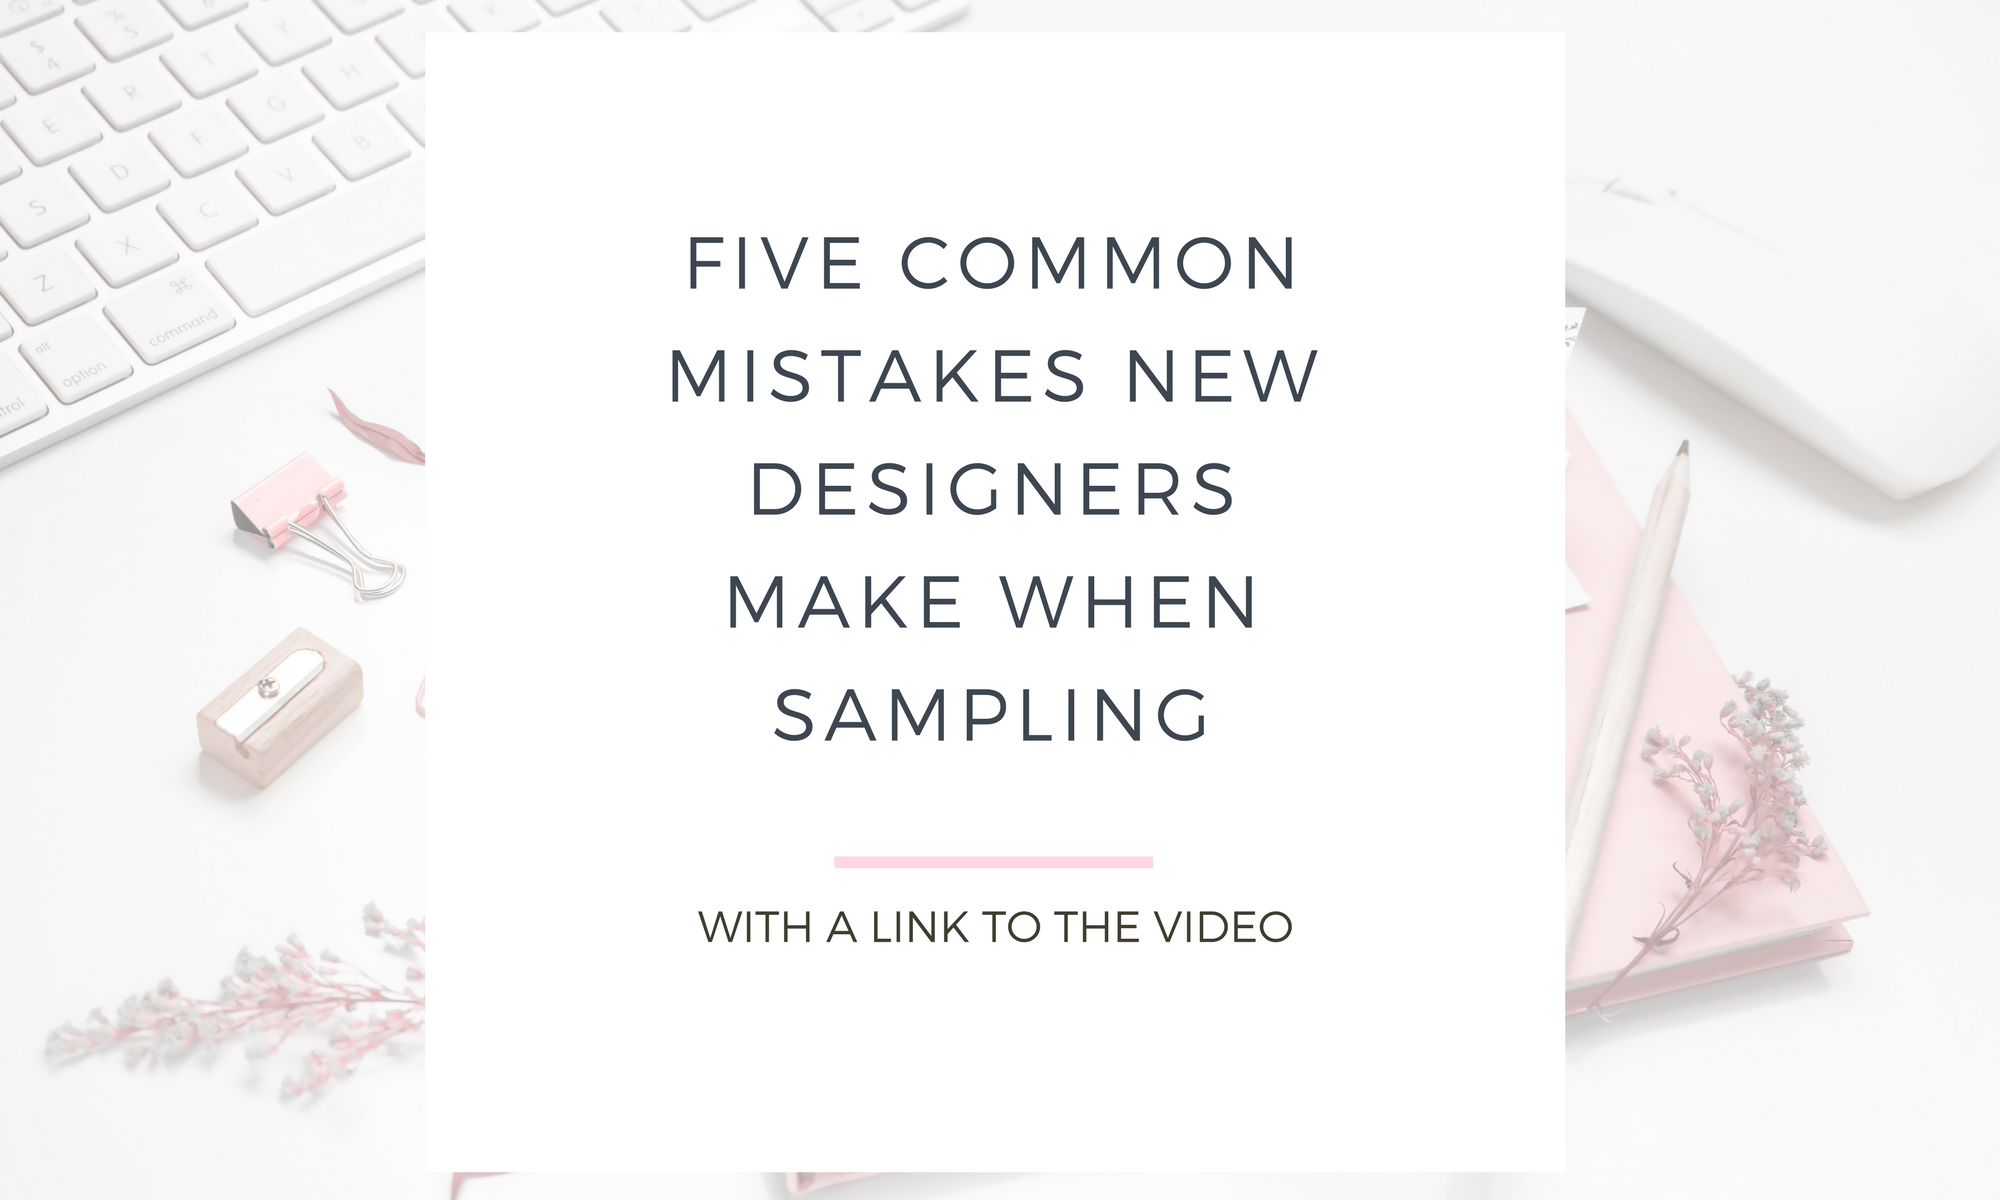 white desk with pink office supplies and overlay that says "FIVE COMMON MISTAKES NEW DESIGNERS MAKE WHEN SAMPLING"